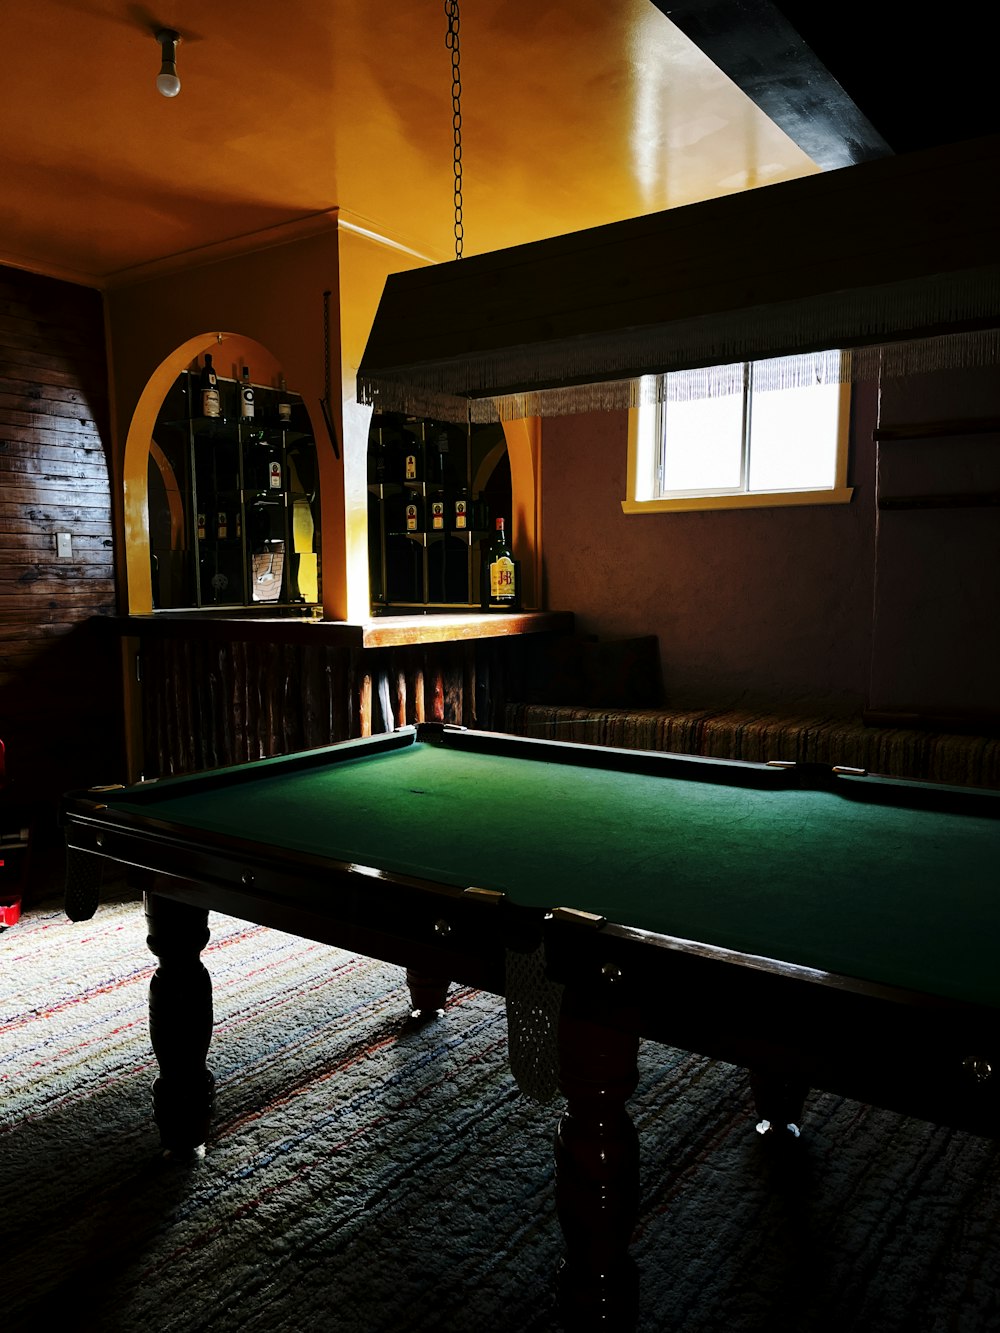 a pool table in a dimly lit room